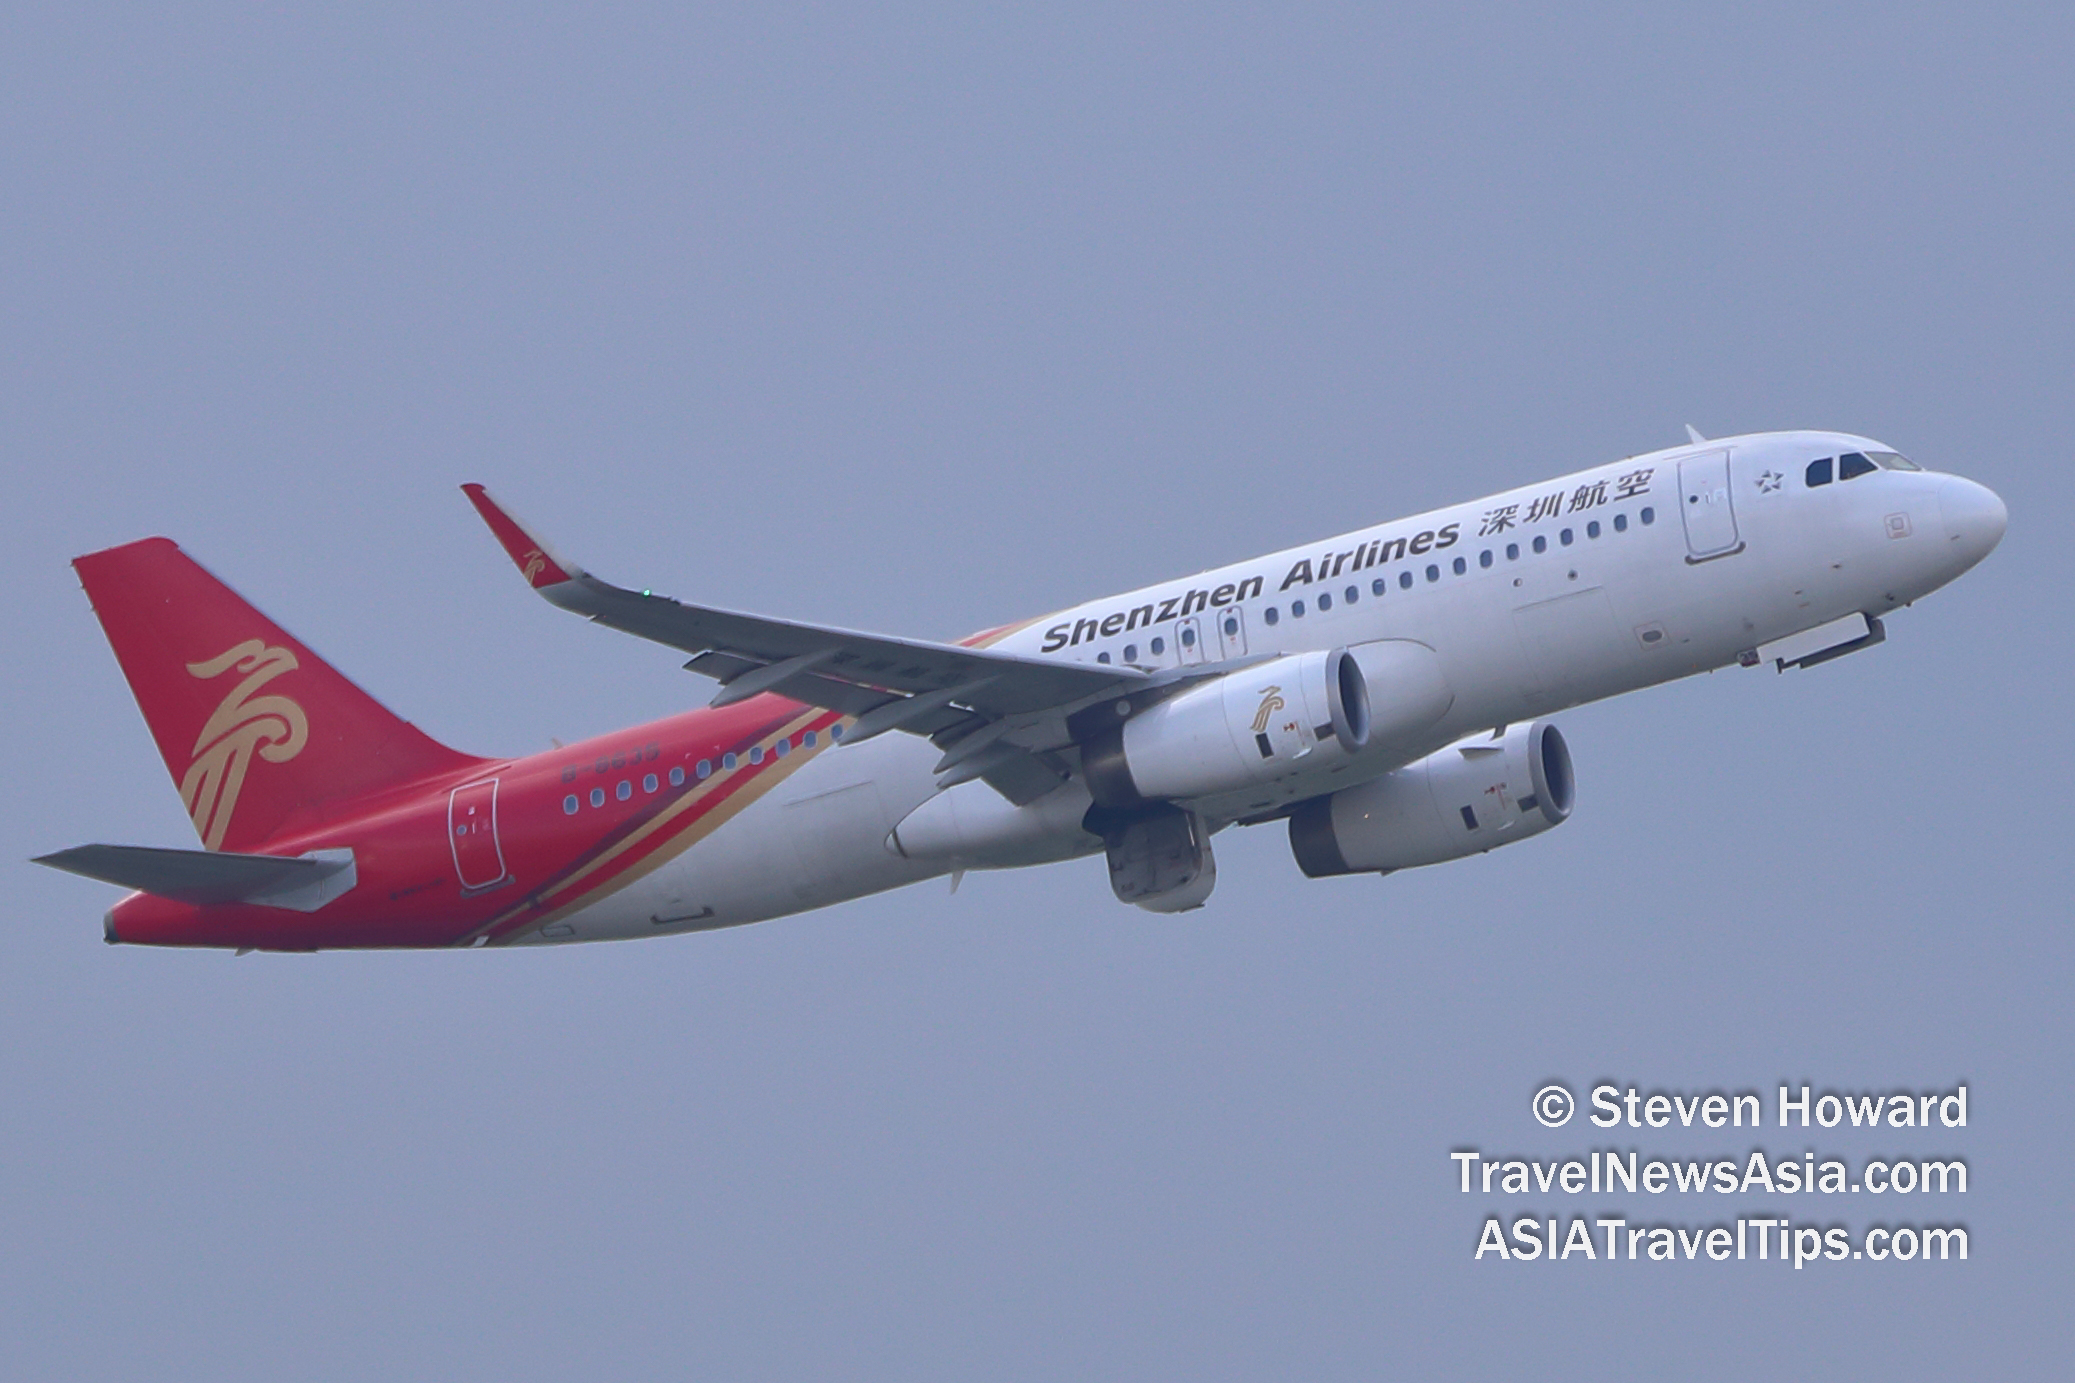 Shenzhen Airlines Airbus A320 reg: B-8365. Picture by Steven Howard of TravelNewsAsia.com Click to enlarge.